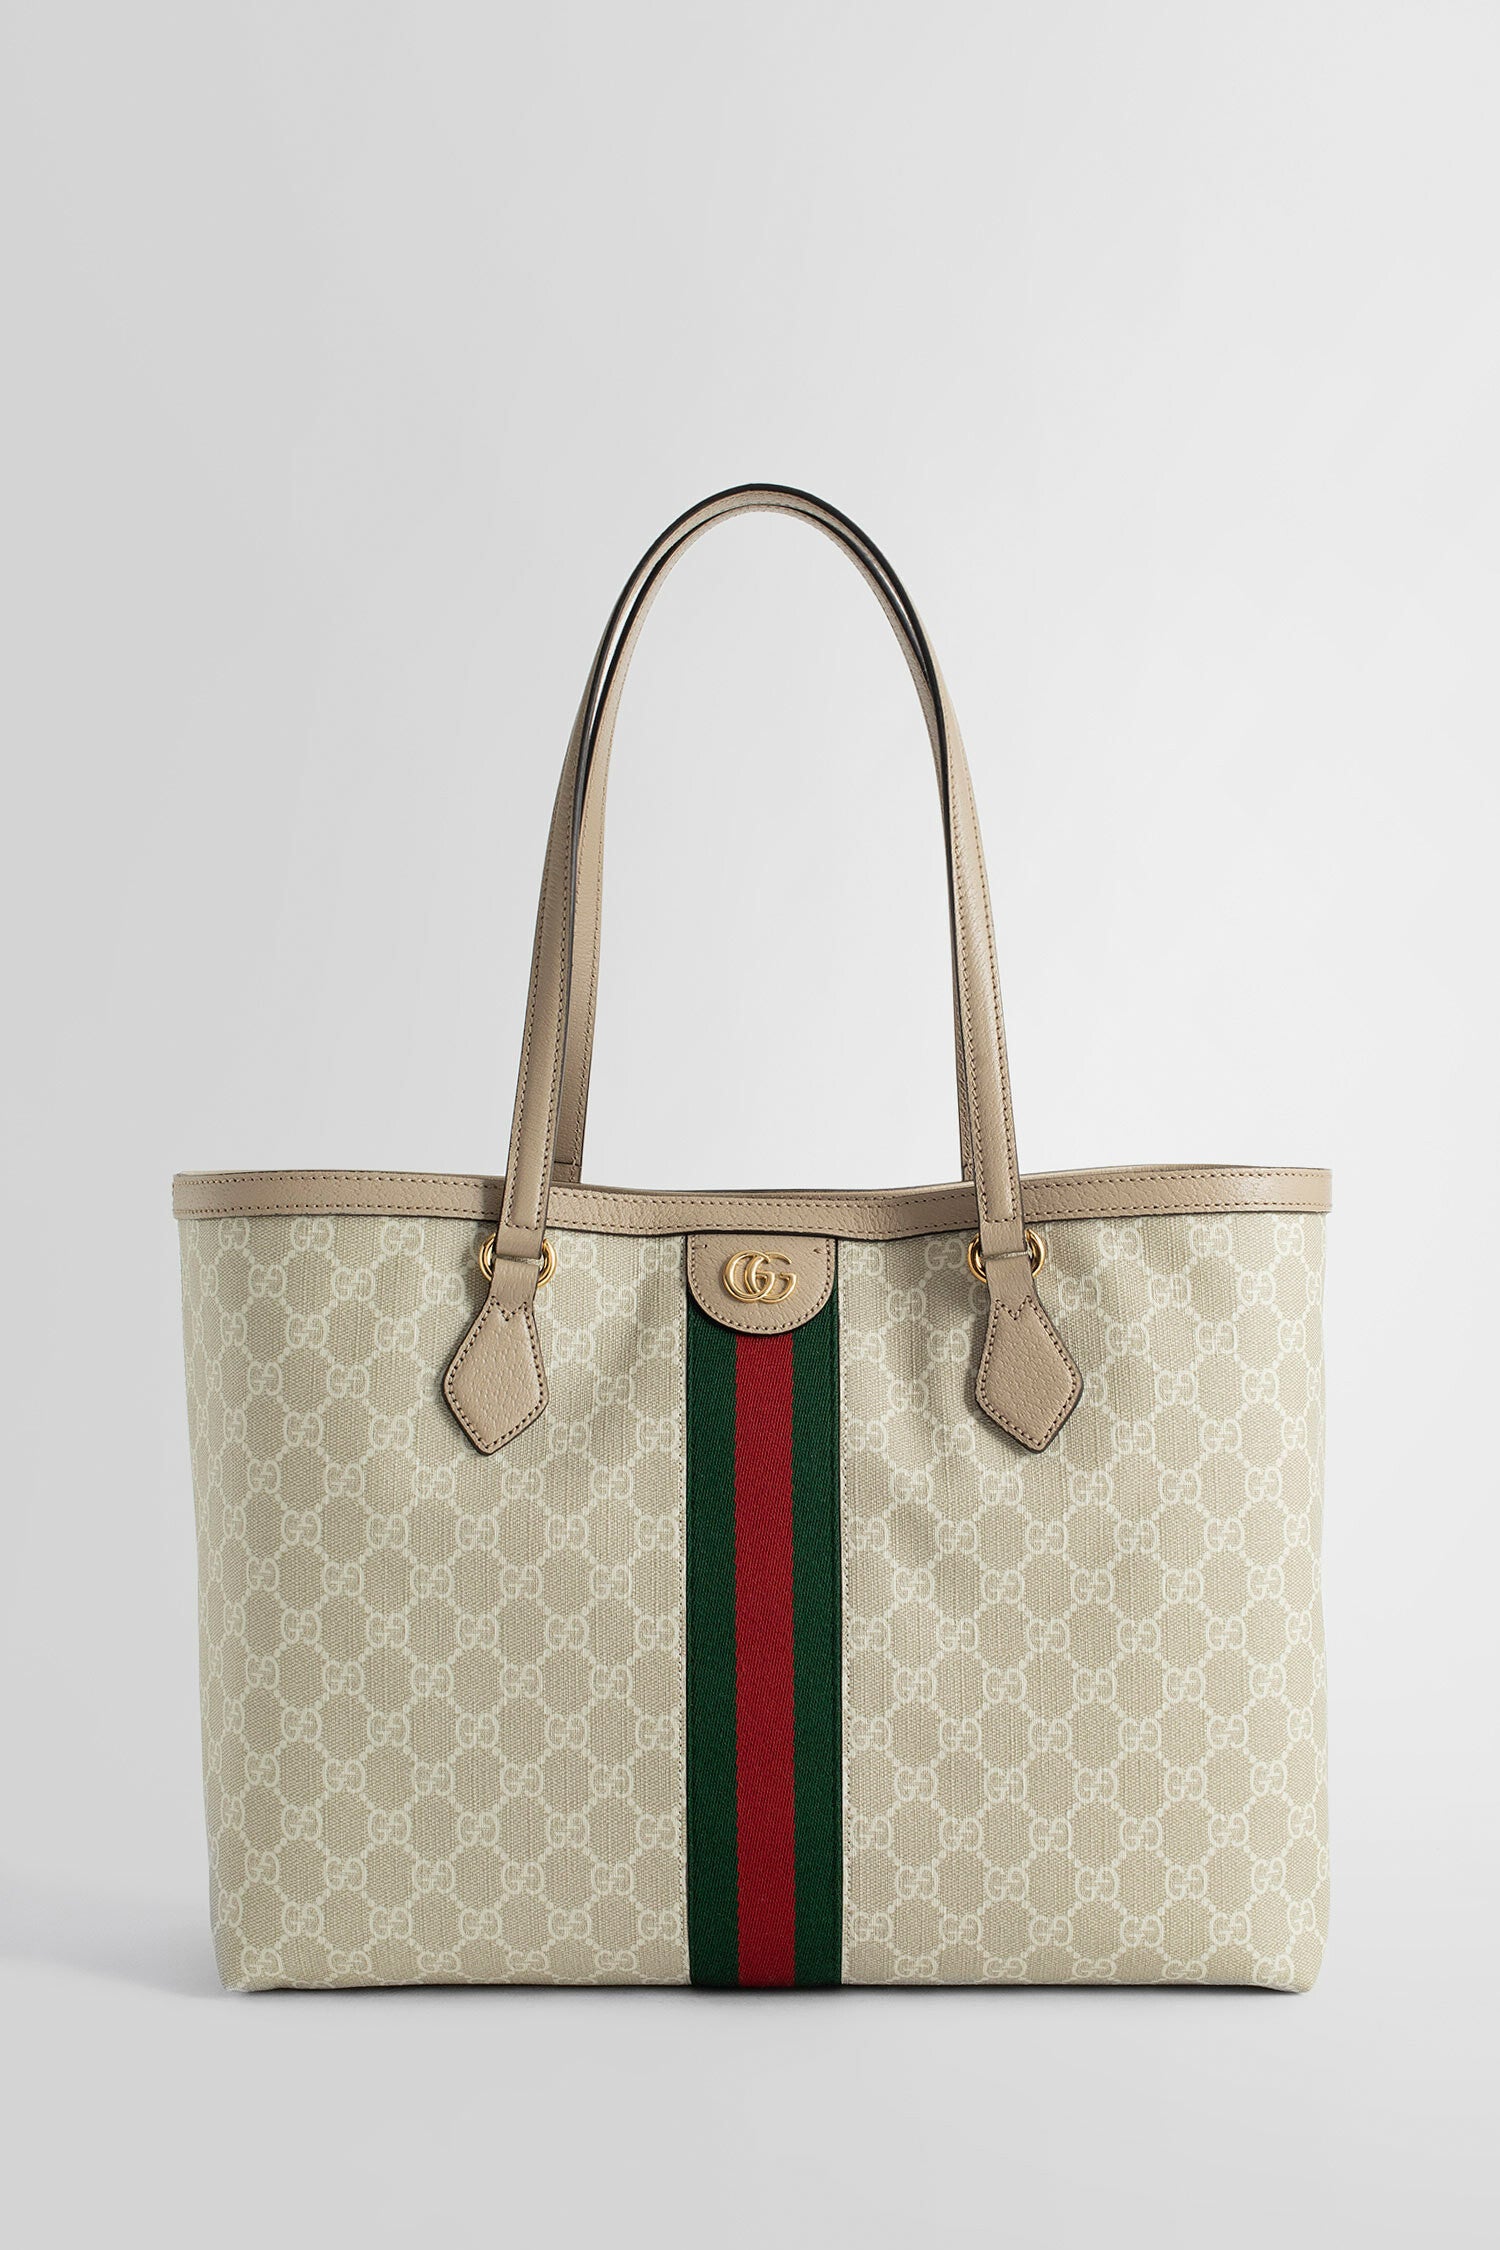 GUCCI WOMAN BEIGE TOTE BAGS